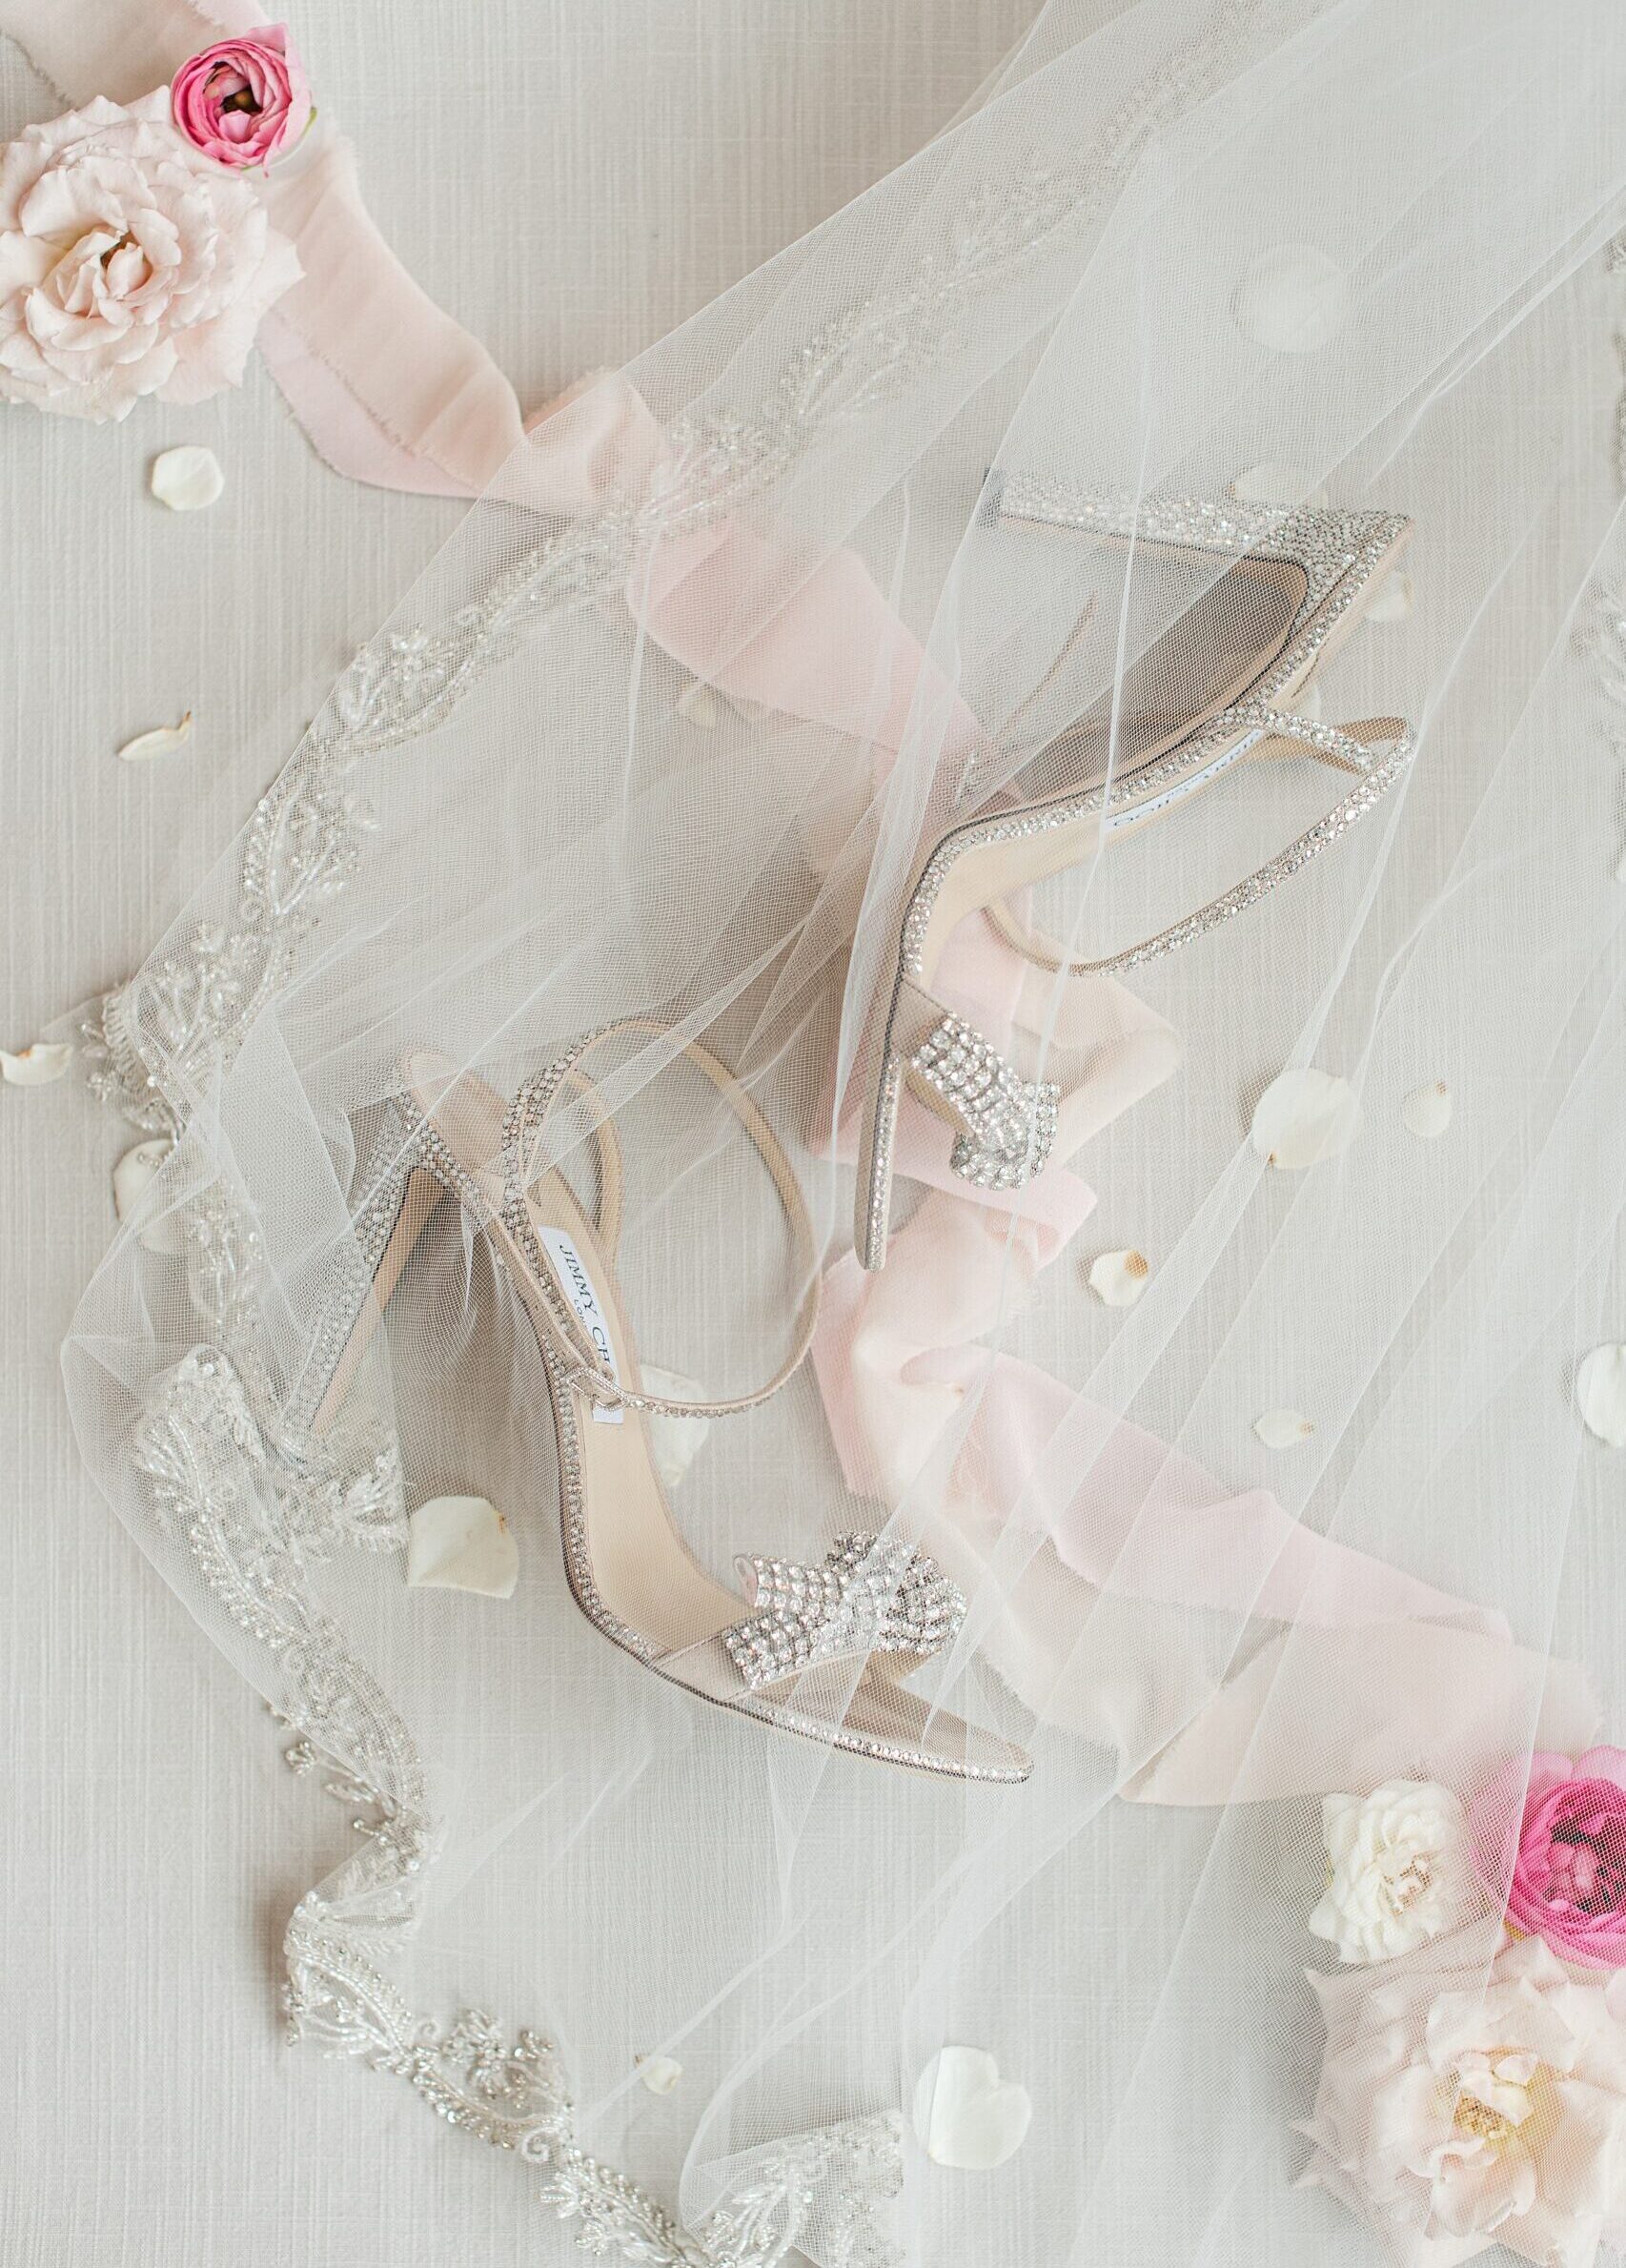 Details of a bride's shoes under a veil with flowers on a table